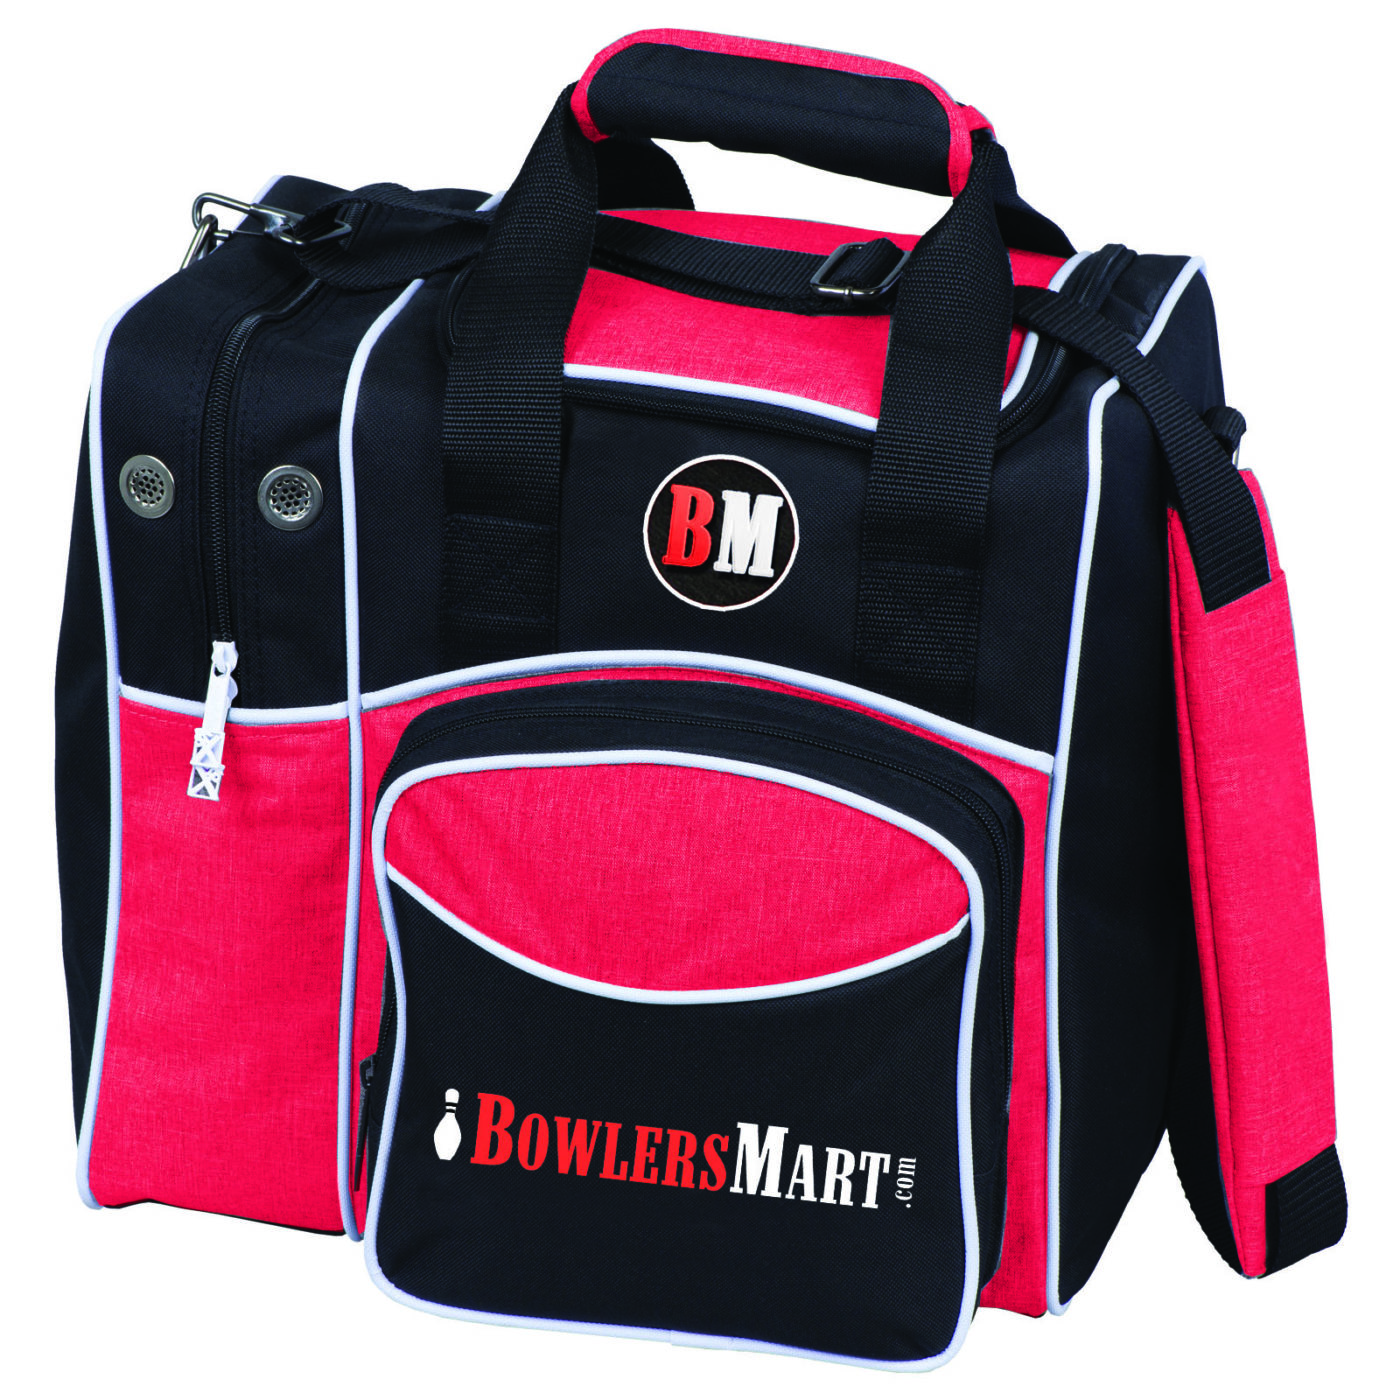  GRANDUP Bowling Ball Bag for Single Ball - Black Bowling  accessories Ball Tote Bag Bowling Bag with Padded Ball Holder - Fits Bowling  Shoes Up to Mens Size 14 : Sports & Outdoors